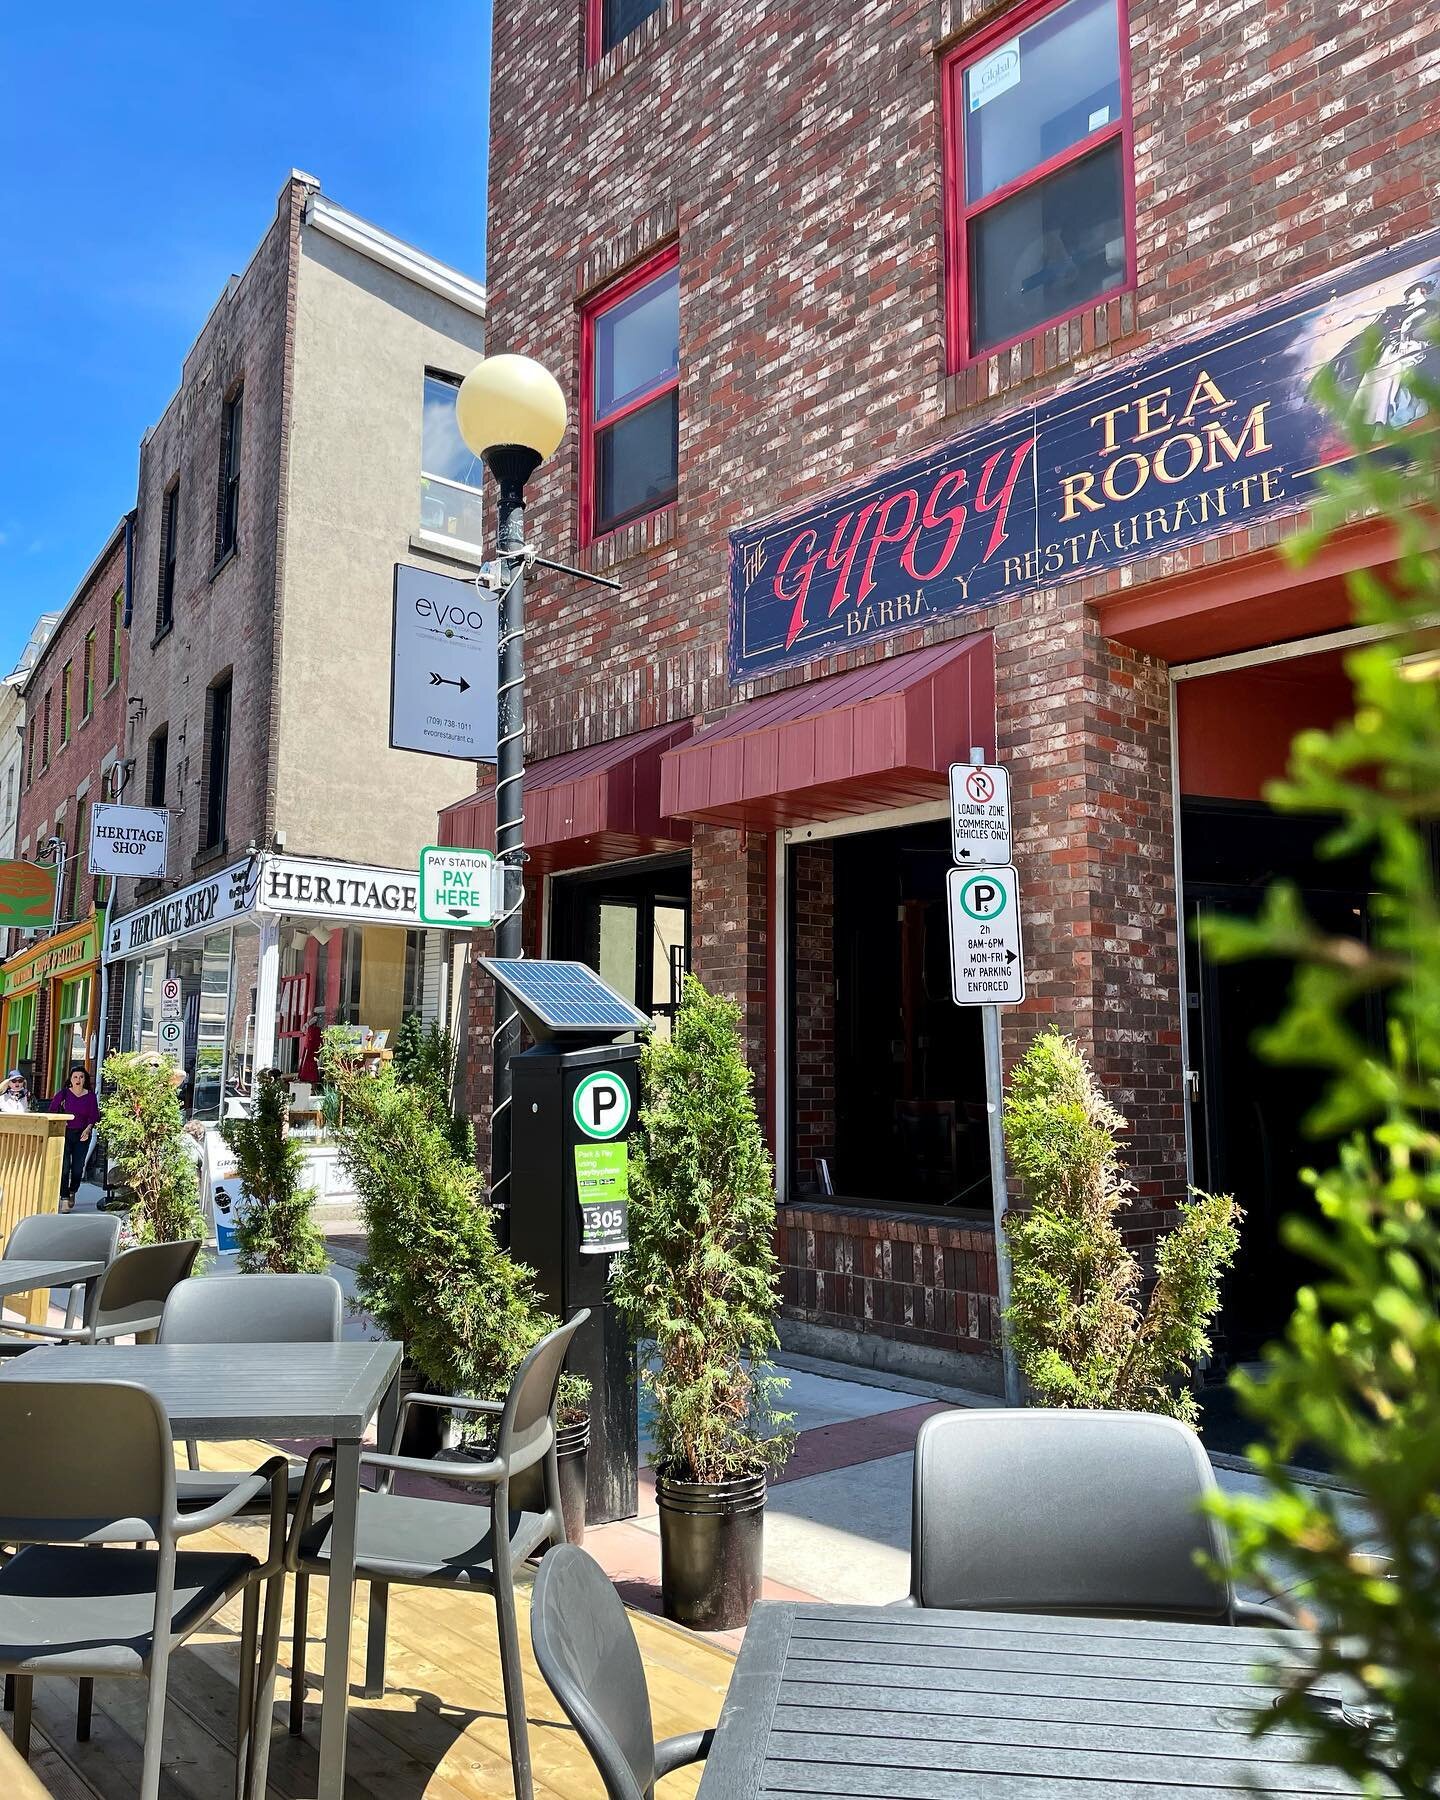 💃🏻Sunny days call for a patio visit at The Gypsy Tea Room ☀️ Our entire menu is available outdoors! First come, first serve🍹 #gypsytearoom #newfoundland